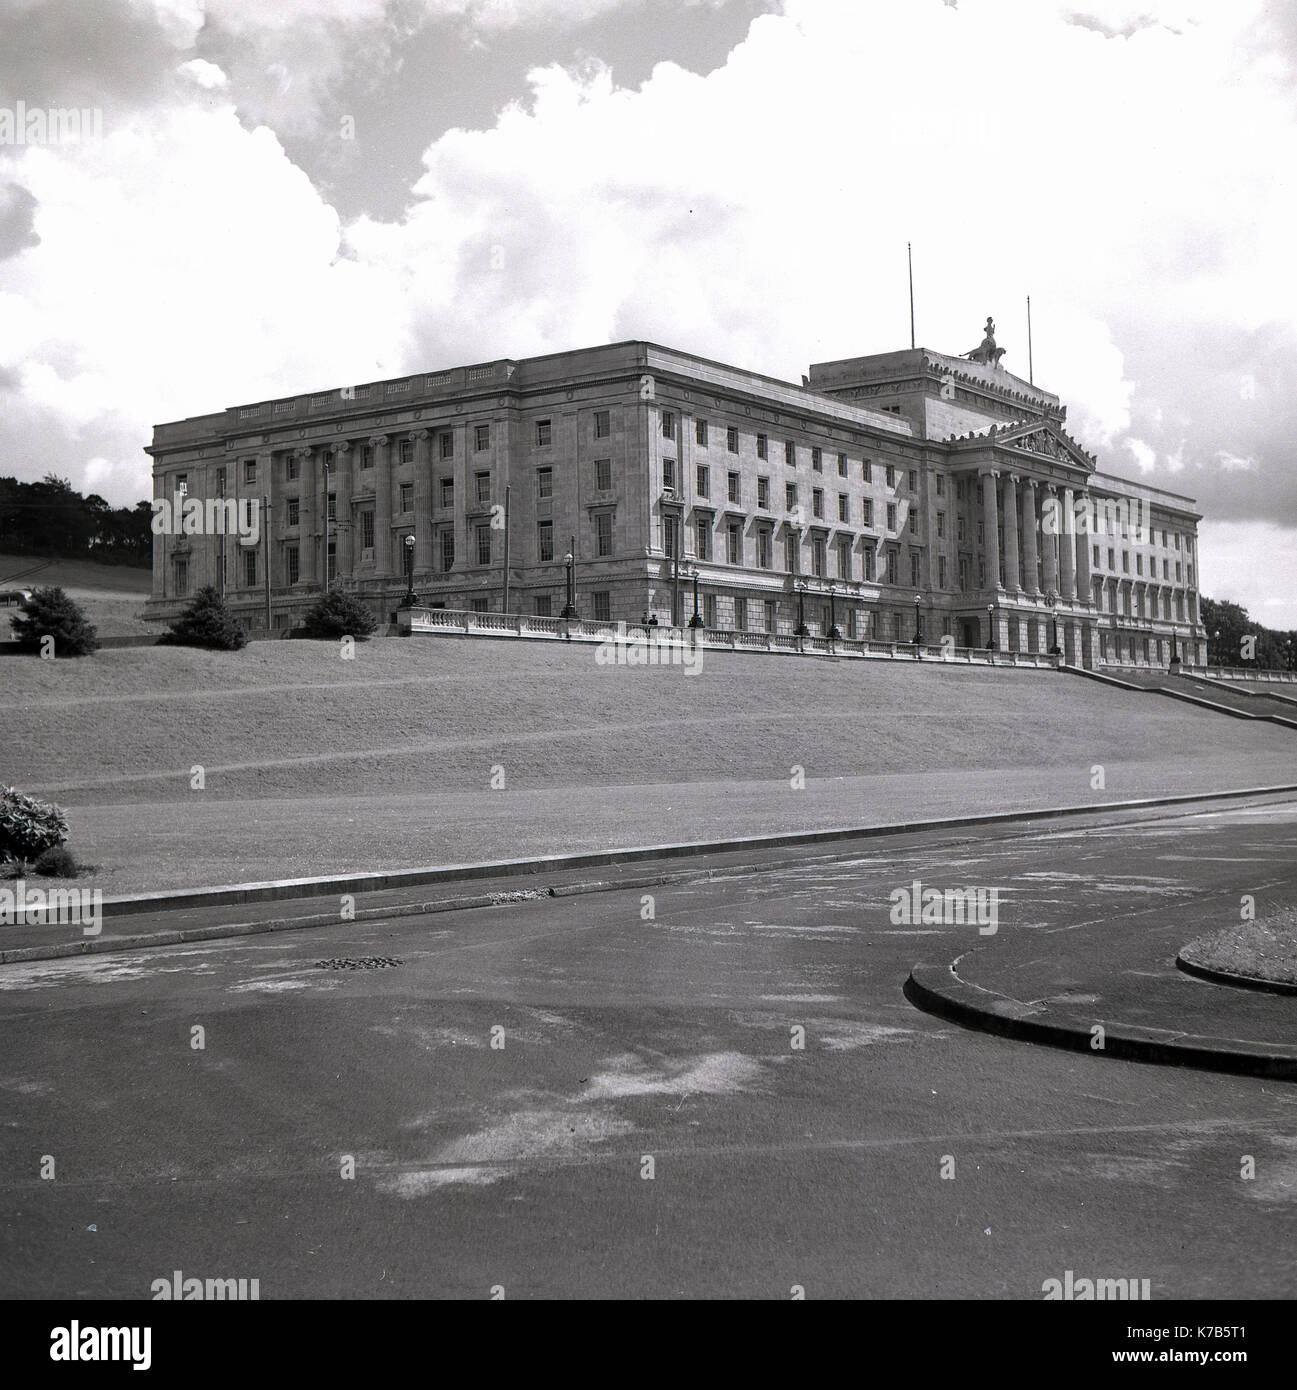 1950s, historical, exterior view of the Parliament building and surrounding park land at Stormont, Belfast, Northern Ireland. The Stormont estate was purchased in 1921 following the partition of Ireland and the grand building seen here, created in the Greek classical style and made from Portland Stone, was officially opened in 1932. Since 1998, it has been the administration location of the devolved government for the country, the Northern Ireland Assembly. Stock Photo